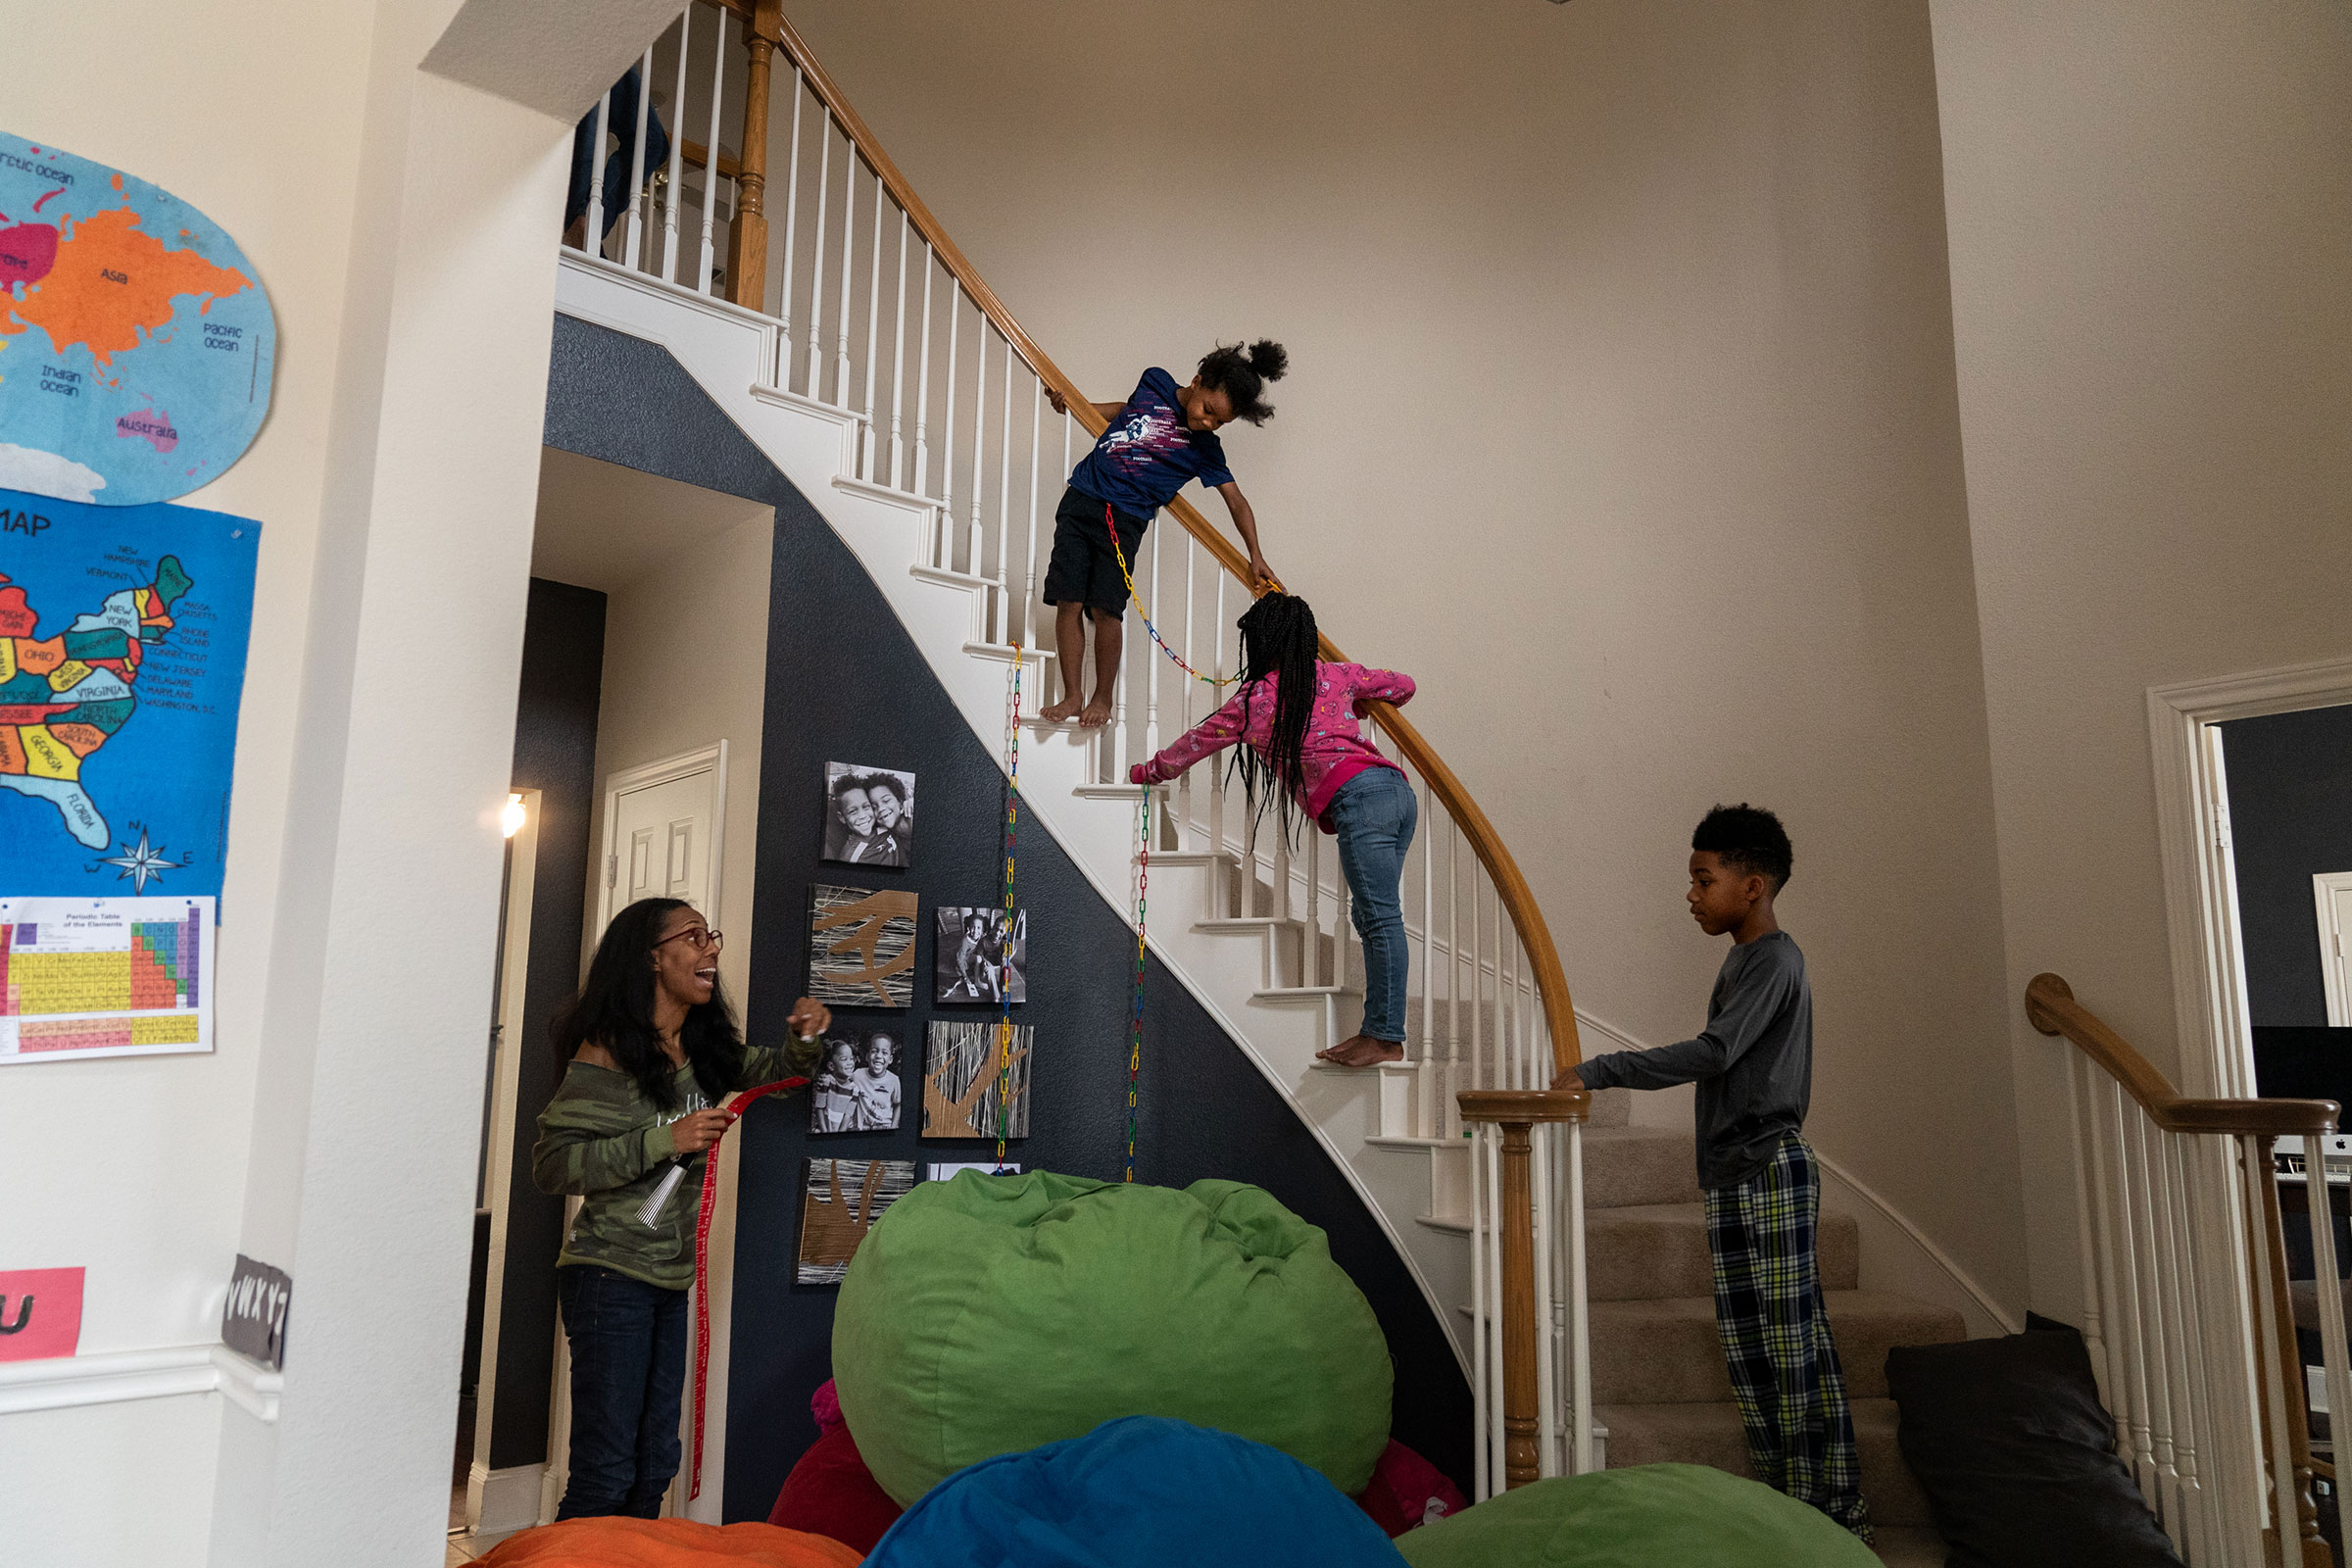 Brax, 6, Bellamy, 8, and Brice, 10, play on the stairs while their mom Andrea wrangles kids to help with a lesson for the younger siblings. (Ilana Panich-Linsman for TIME)